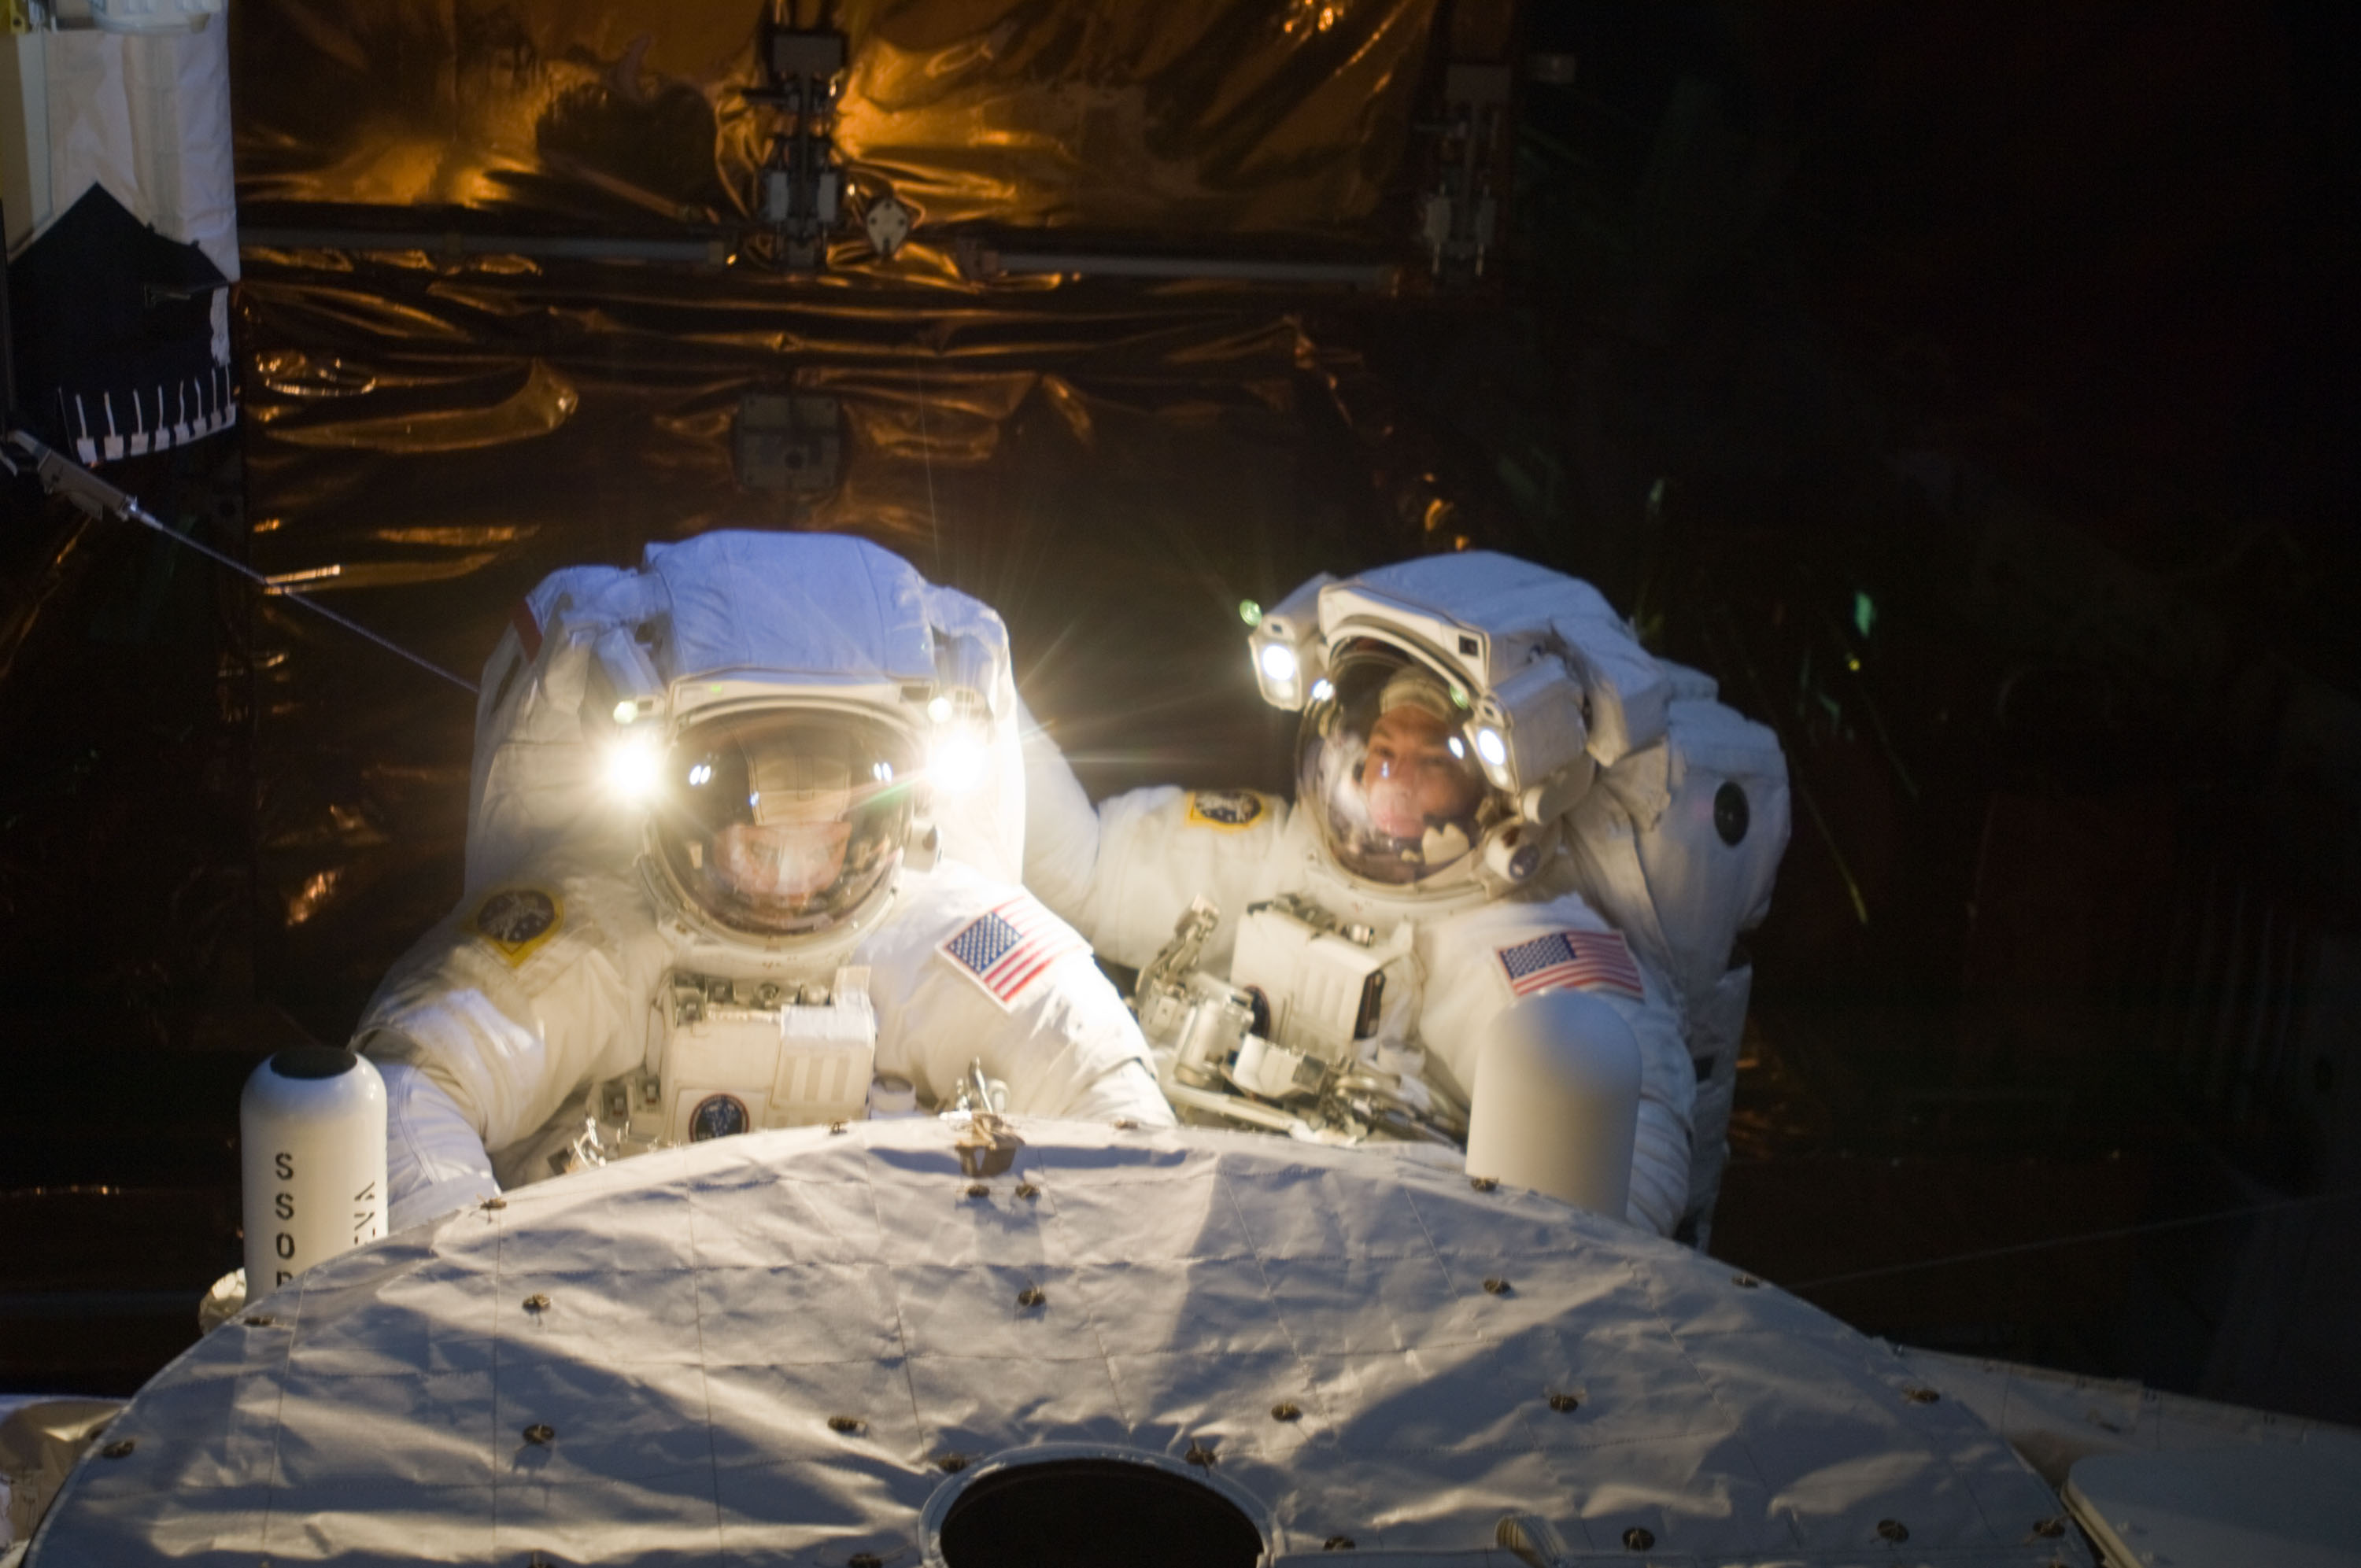 Two astronauts at the airlock on the shuttle with their helmet lights turned on.